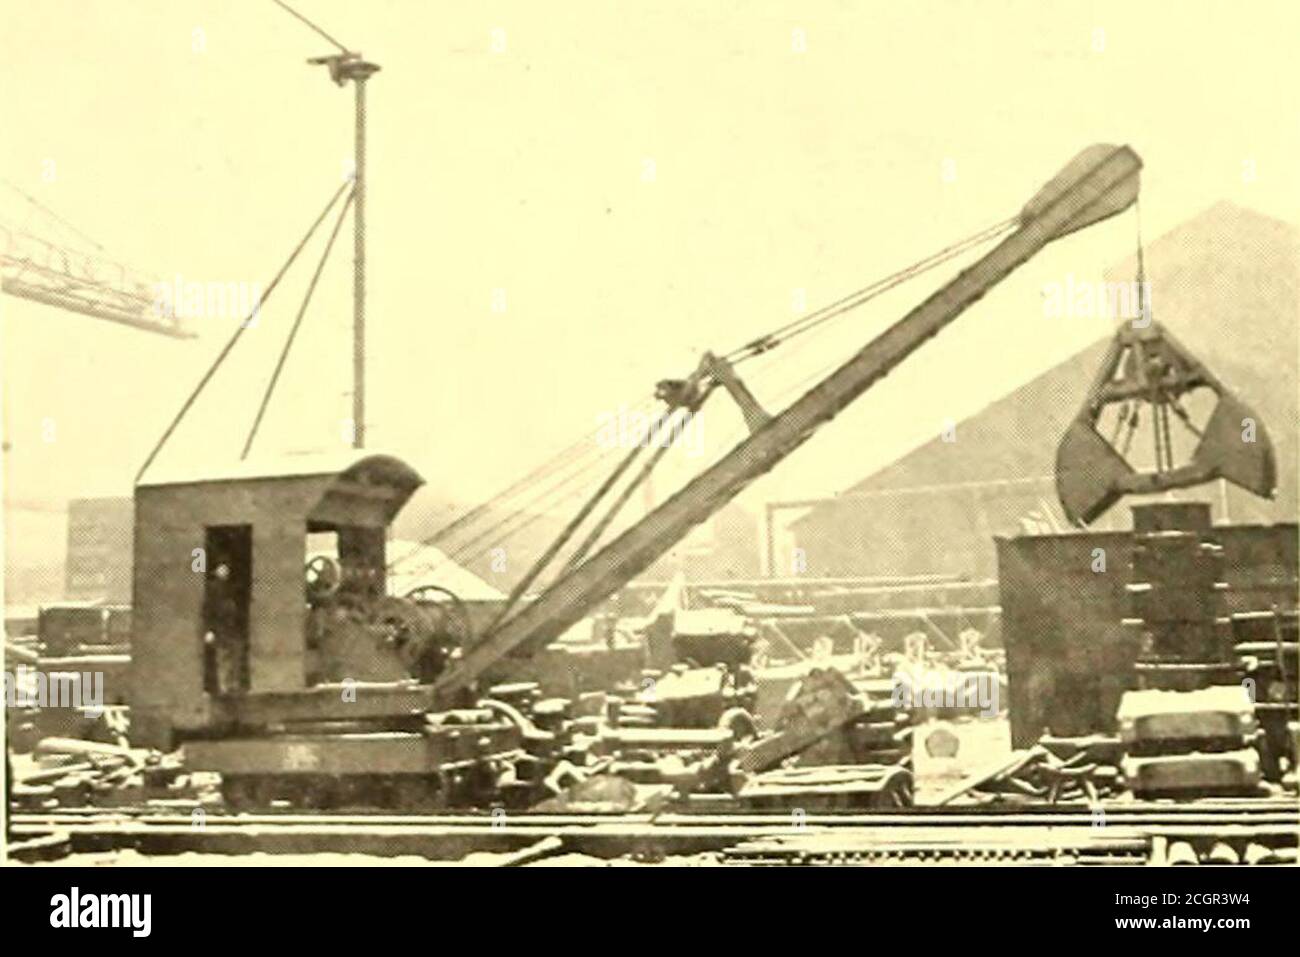 . The Street railway journal . For Lilting car Motors and other hea things around a PowerStation or Car Barn, the best helps are ! Brownloisl Locomotive Cranes WE ALSO MAKE. Electric Traveling Cranes, Overhead Trolleysfor Dynamo Rooms, Wrecking and Con=struction Cranes for Street Railways, Coaland Ash Conveyors for Boiler Houses. SEND l-OK CATALOGUE DESCRIBINGEVERY SORT OF HOISTING APPARATUS THE BROWN HOISTING MACHINERY CO. 1450 ST. CLAIR STREET, CLEVELAND, OHIOHavemeyer Hldj;., New ork. Frick Kldj;., Pittsburg, Pa. A Great Money Saver!Trenton Trolley Wagon With Revolving Platform and Extens Stock Photo